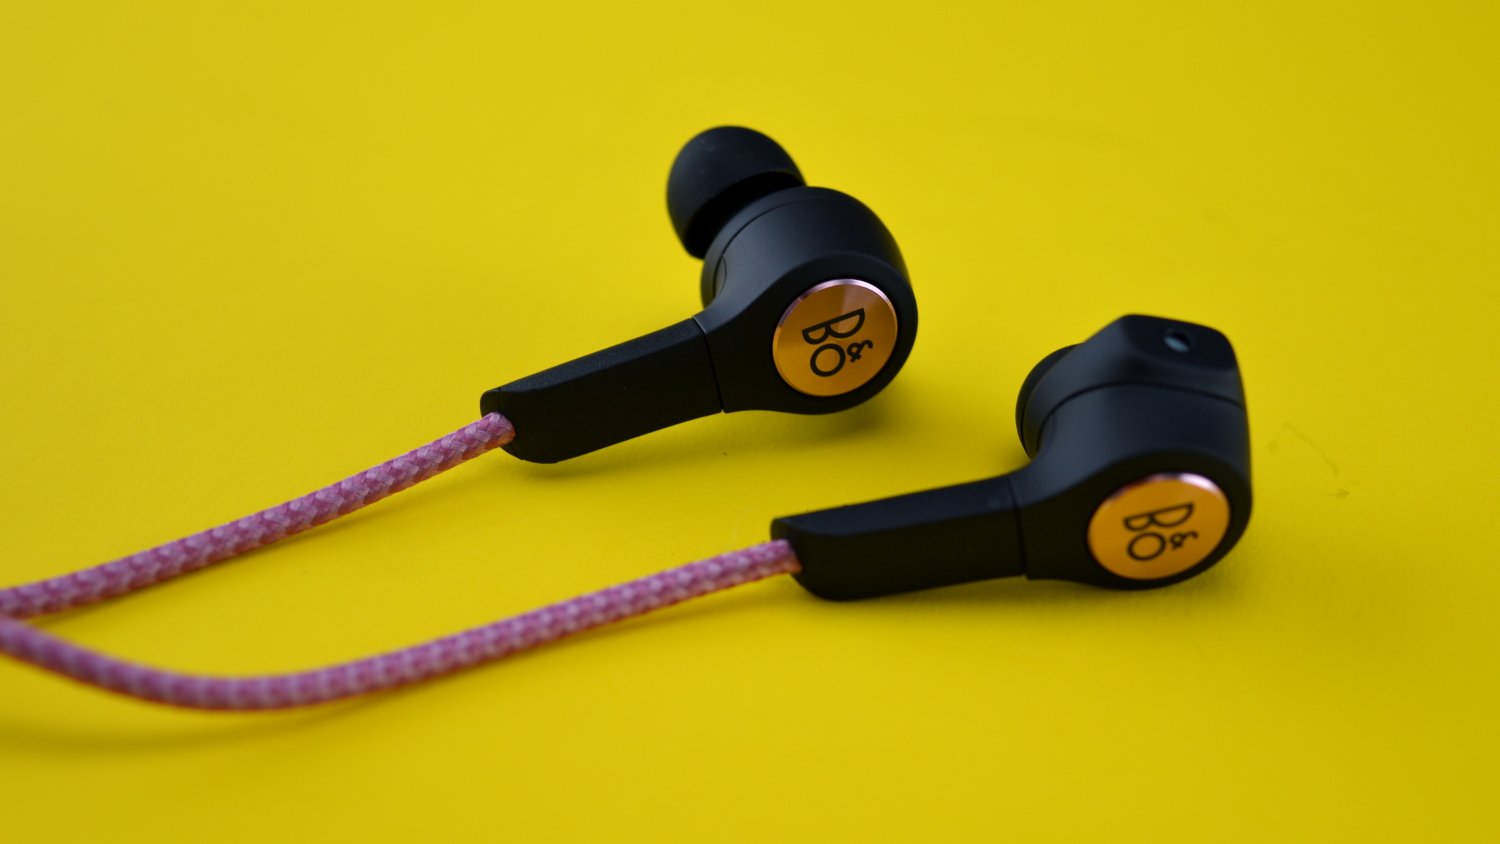 AURICULARES BANG AND OLUFSEN BEOPLAY H5